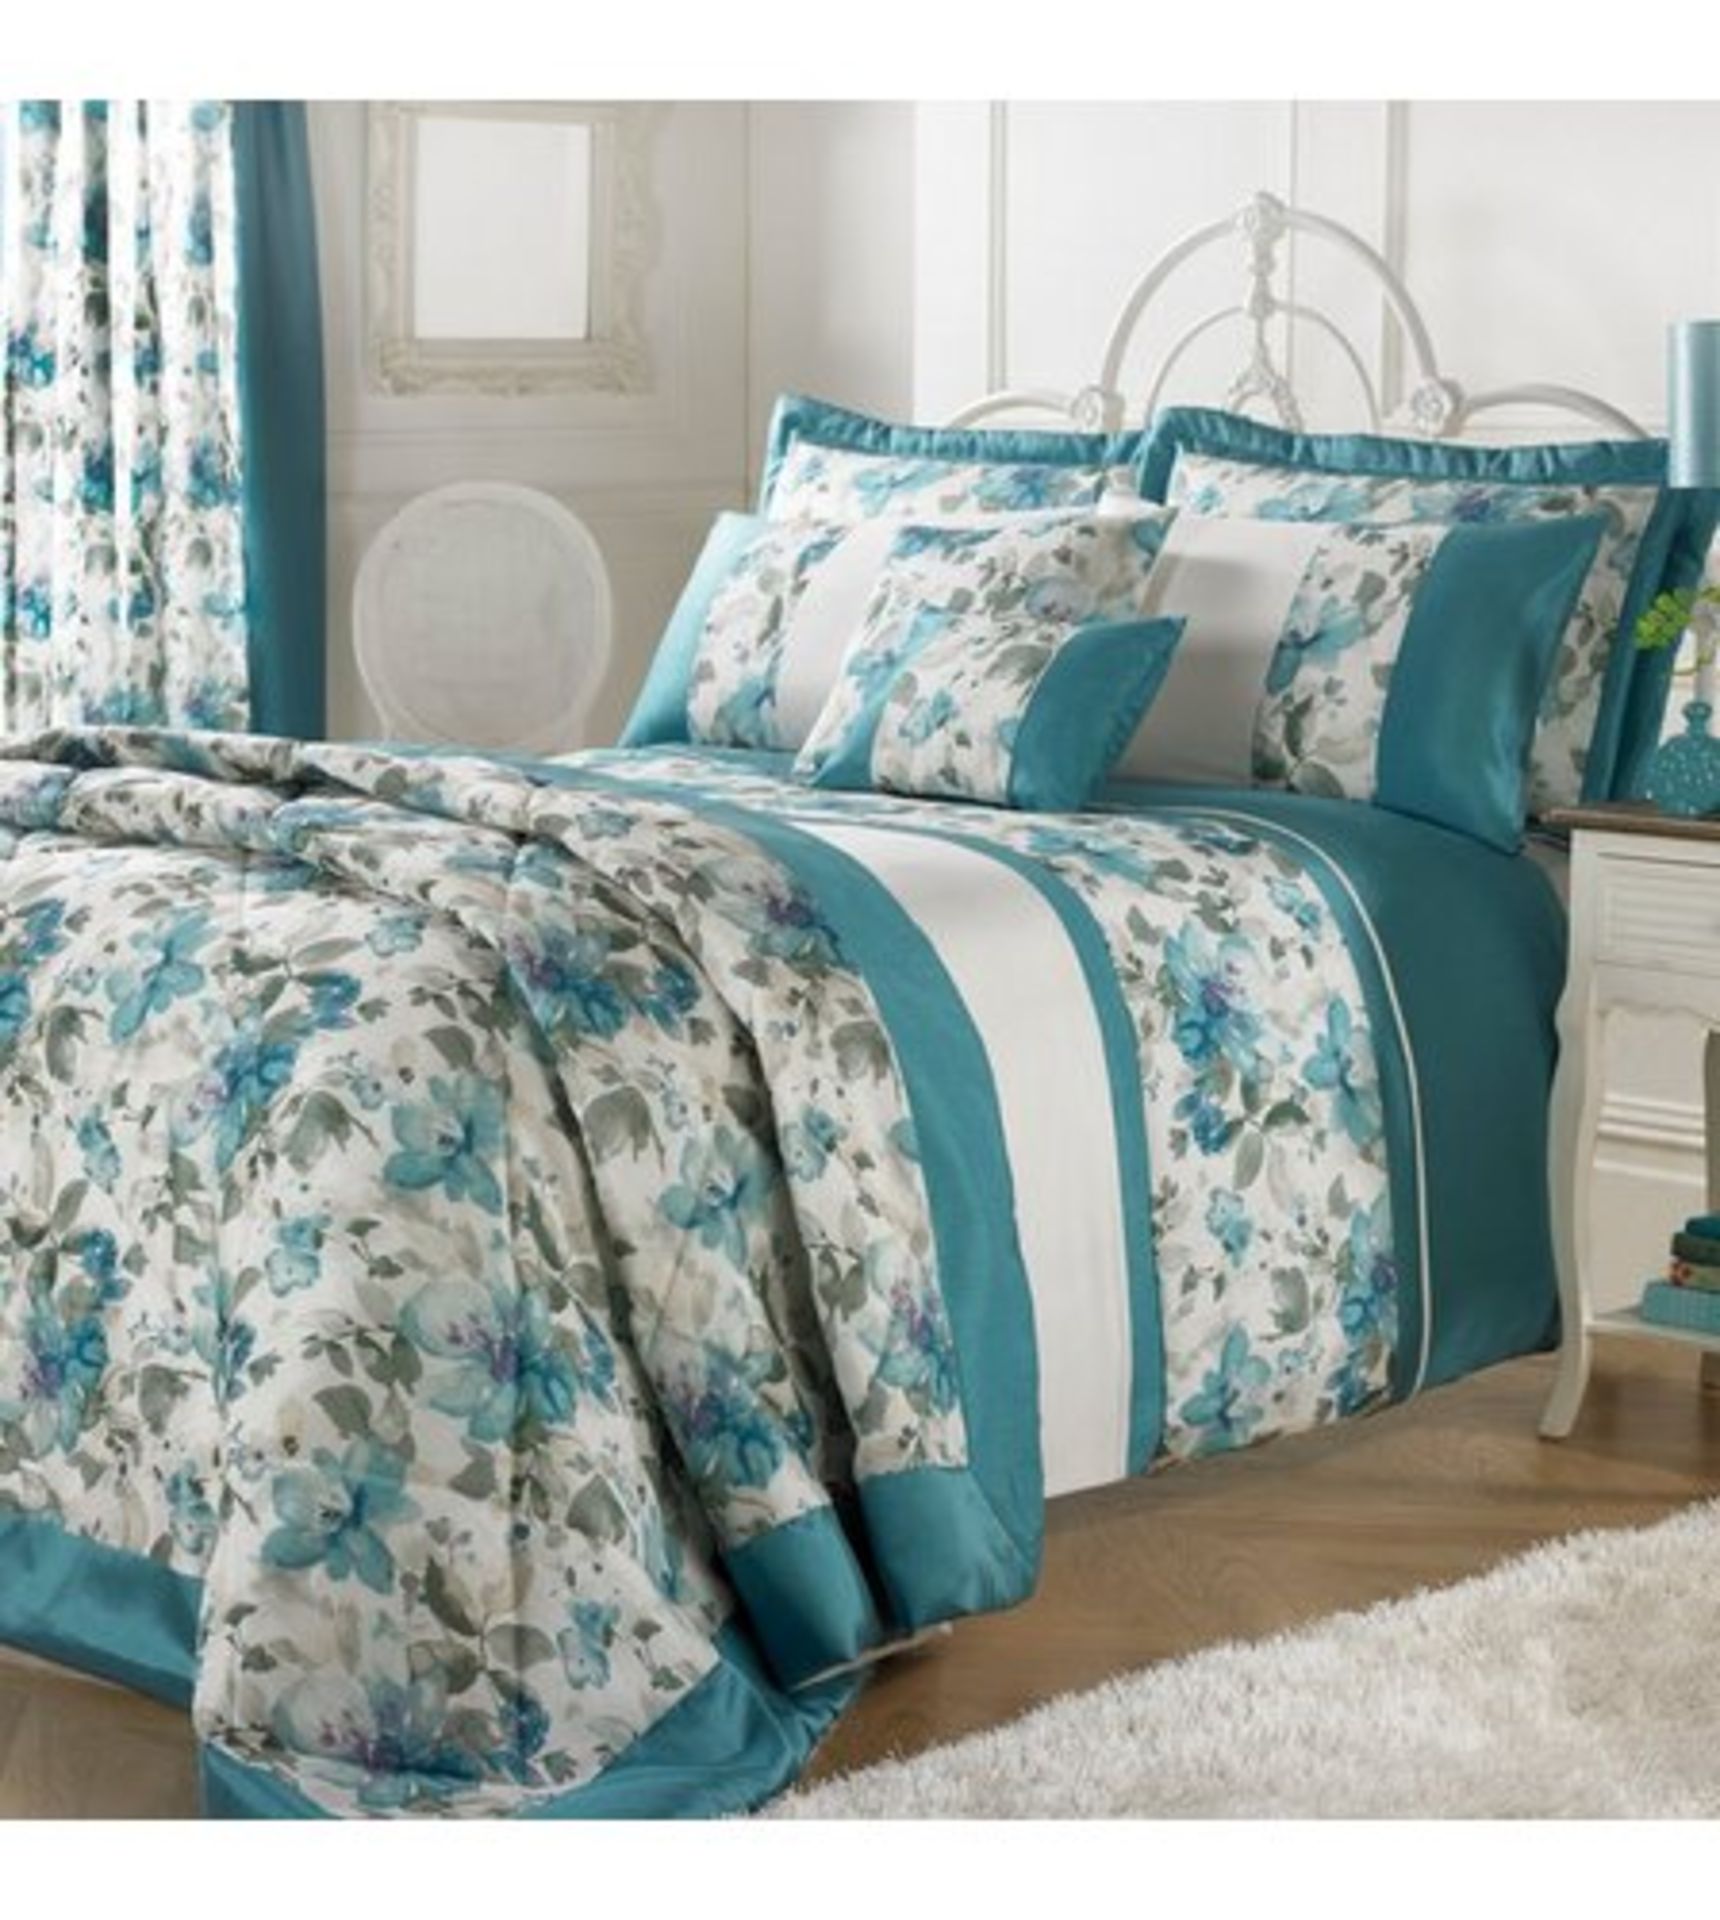 1 AS NEW BAGGED GEORGINA KING DUVET SET IN TEAL (VIEWING AVAILABLE)